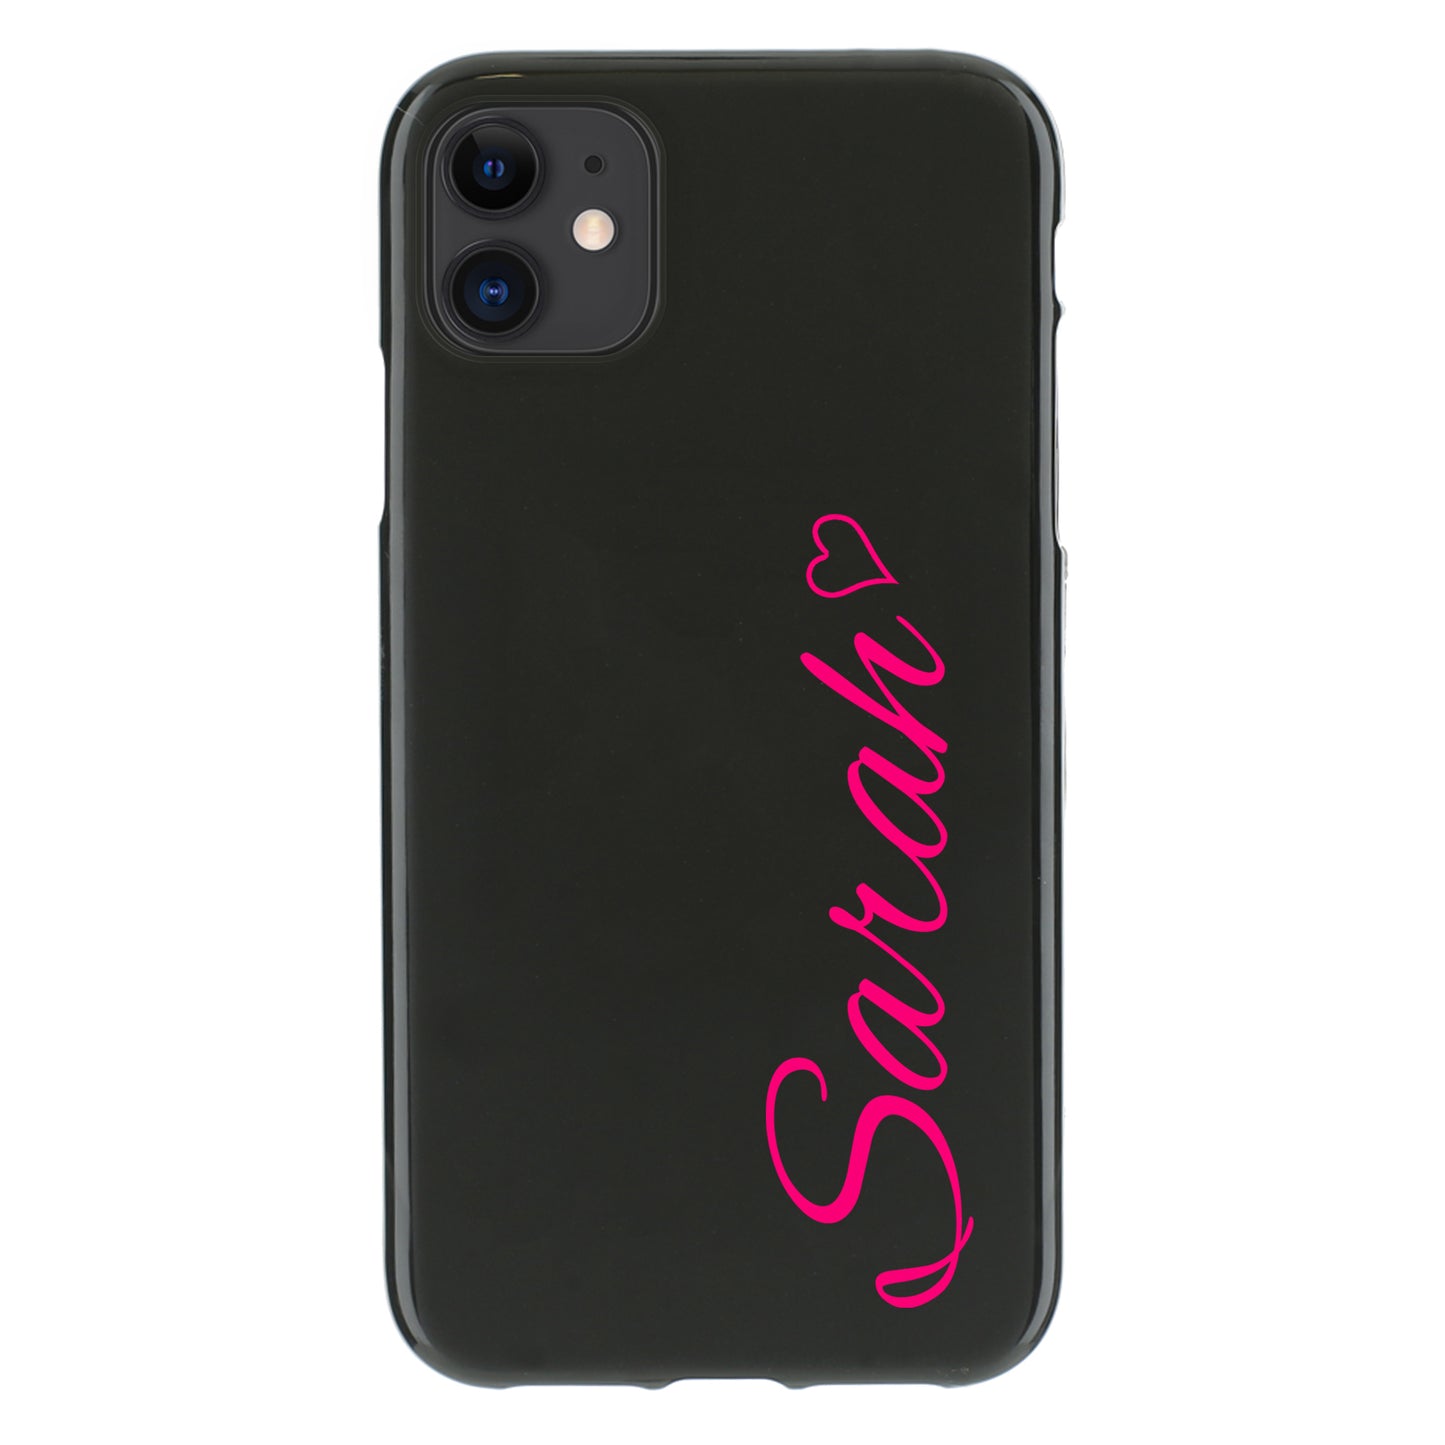 Personalised LG Phone Gel Case with Hot Pink Heart Accented Text